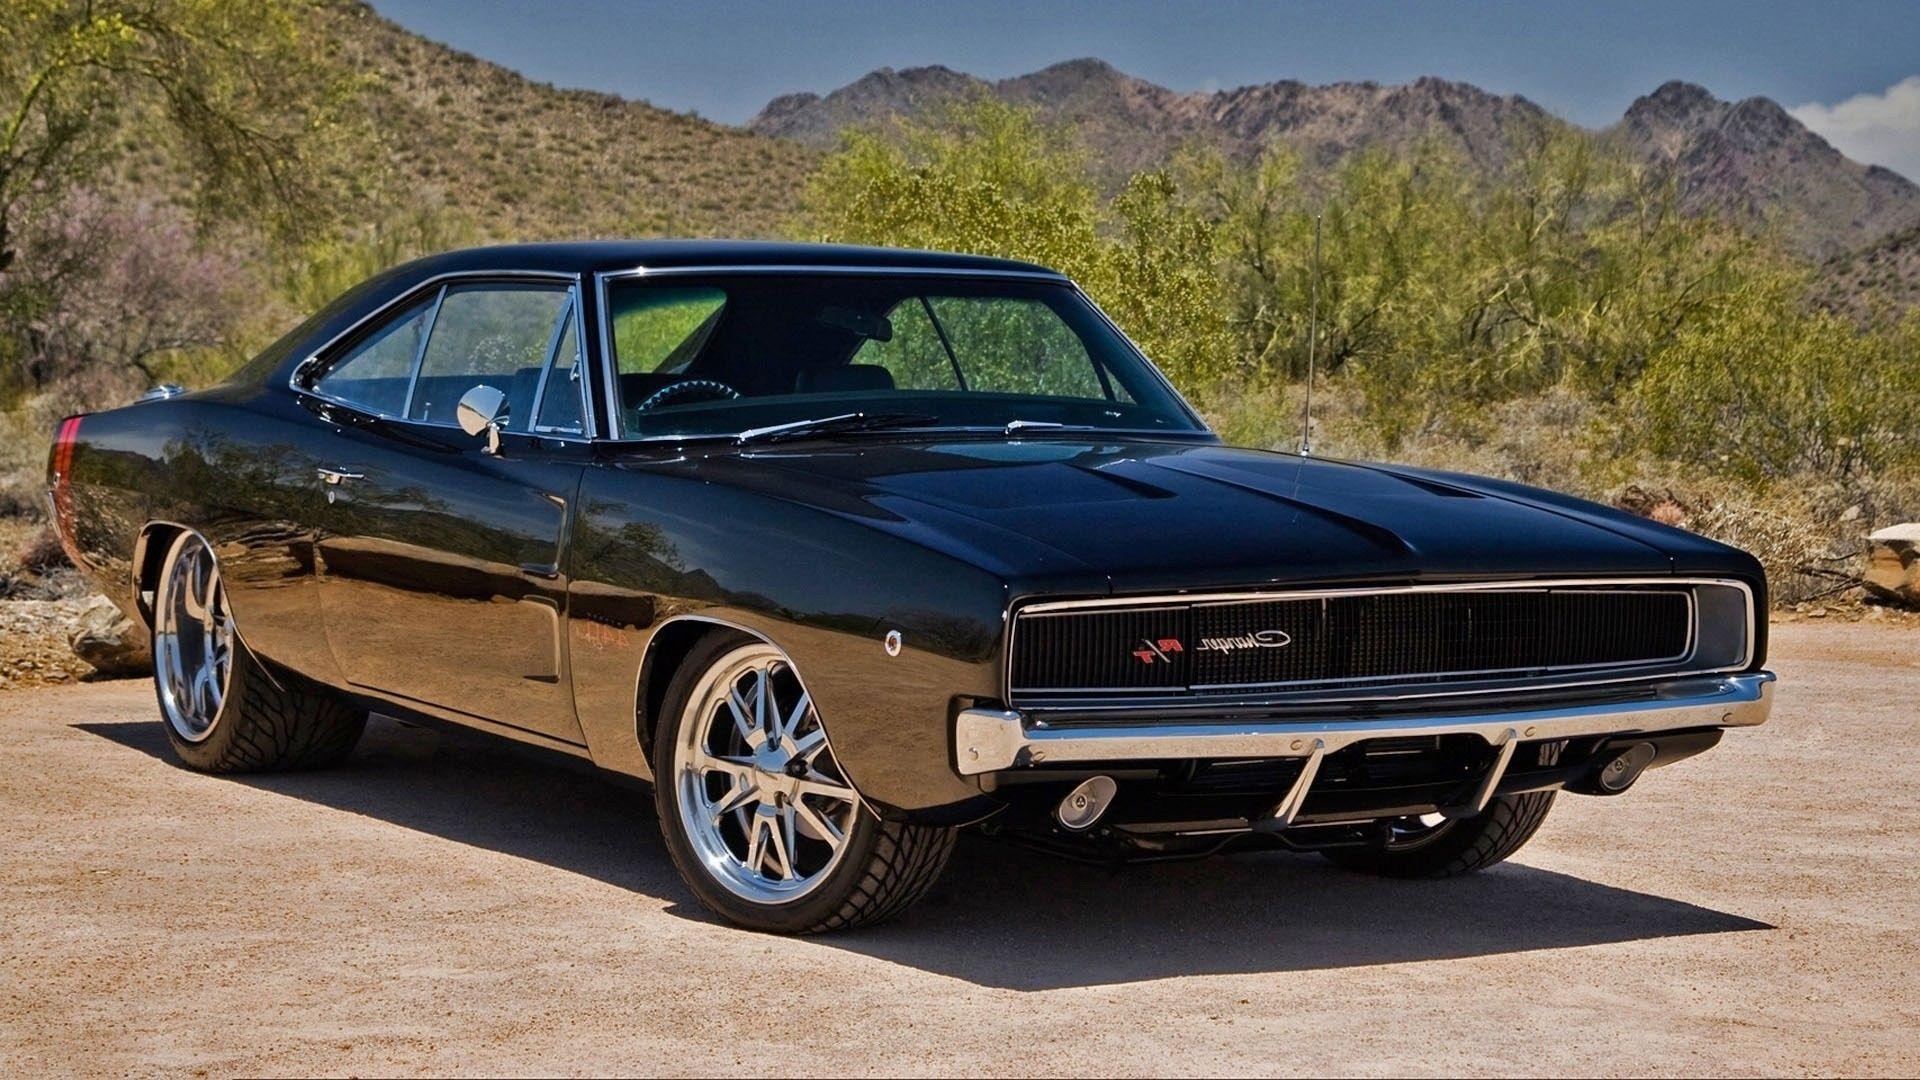 Download wallpapers Dodge Charger RT muscle cars 1969 cars night retro  cars gray Charger tuning american cars Dodge for desktop free Pictures  for desktop free